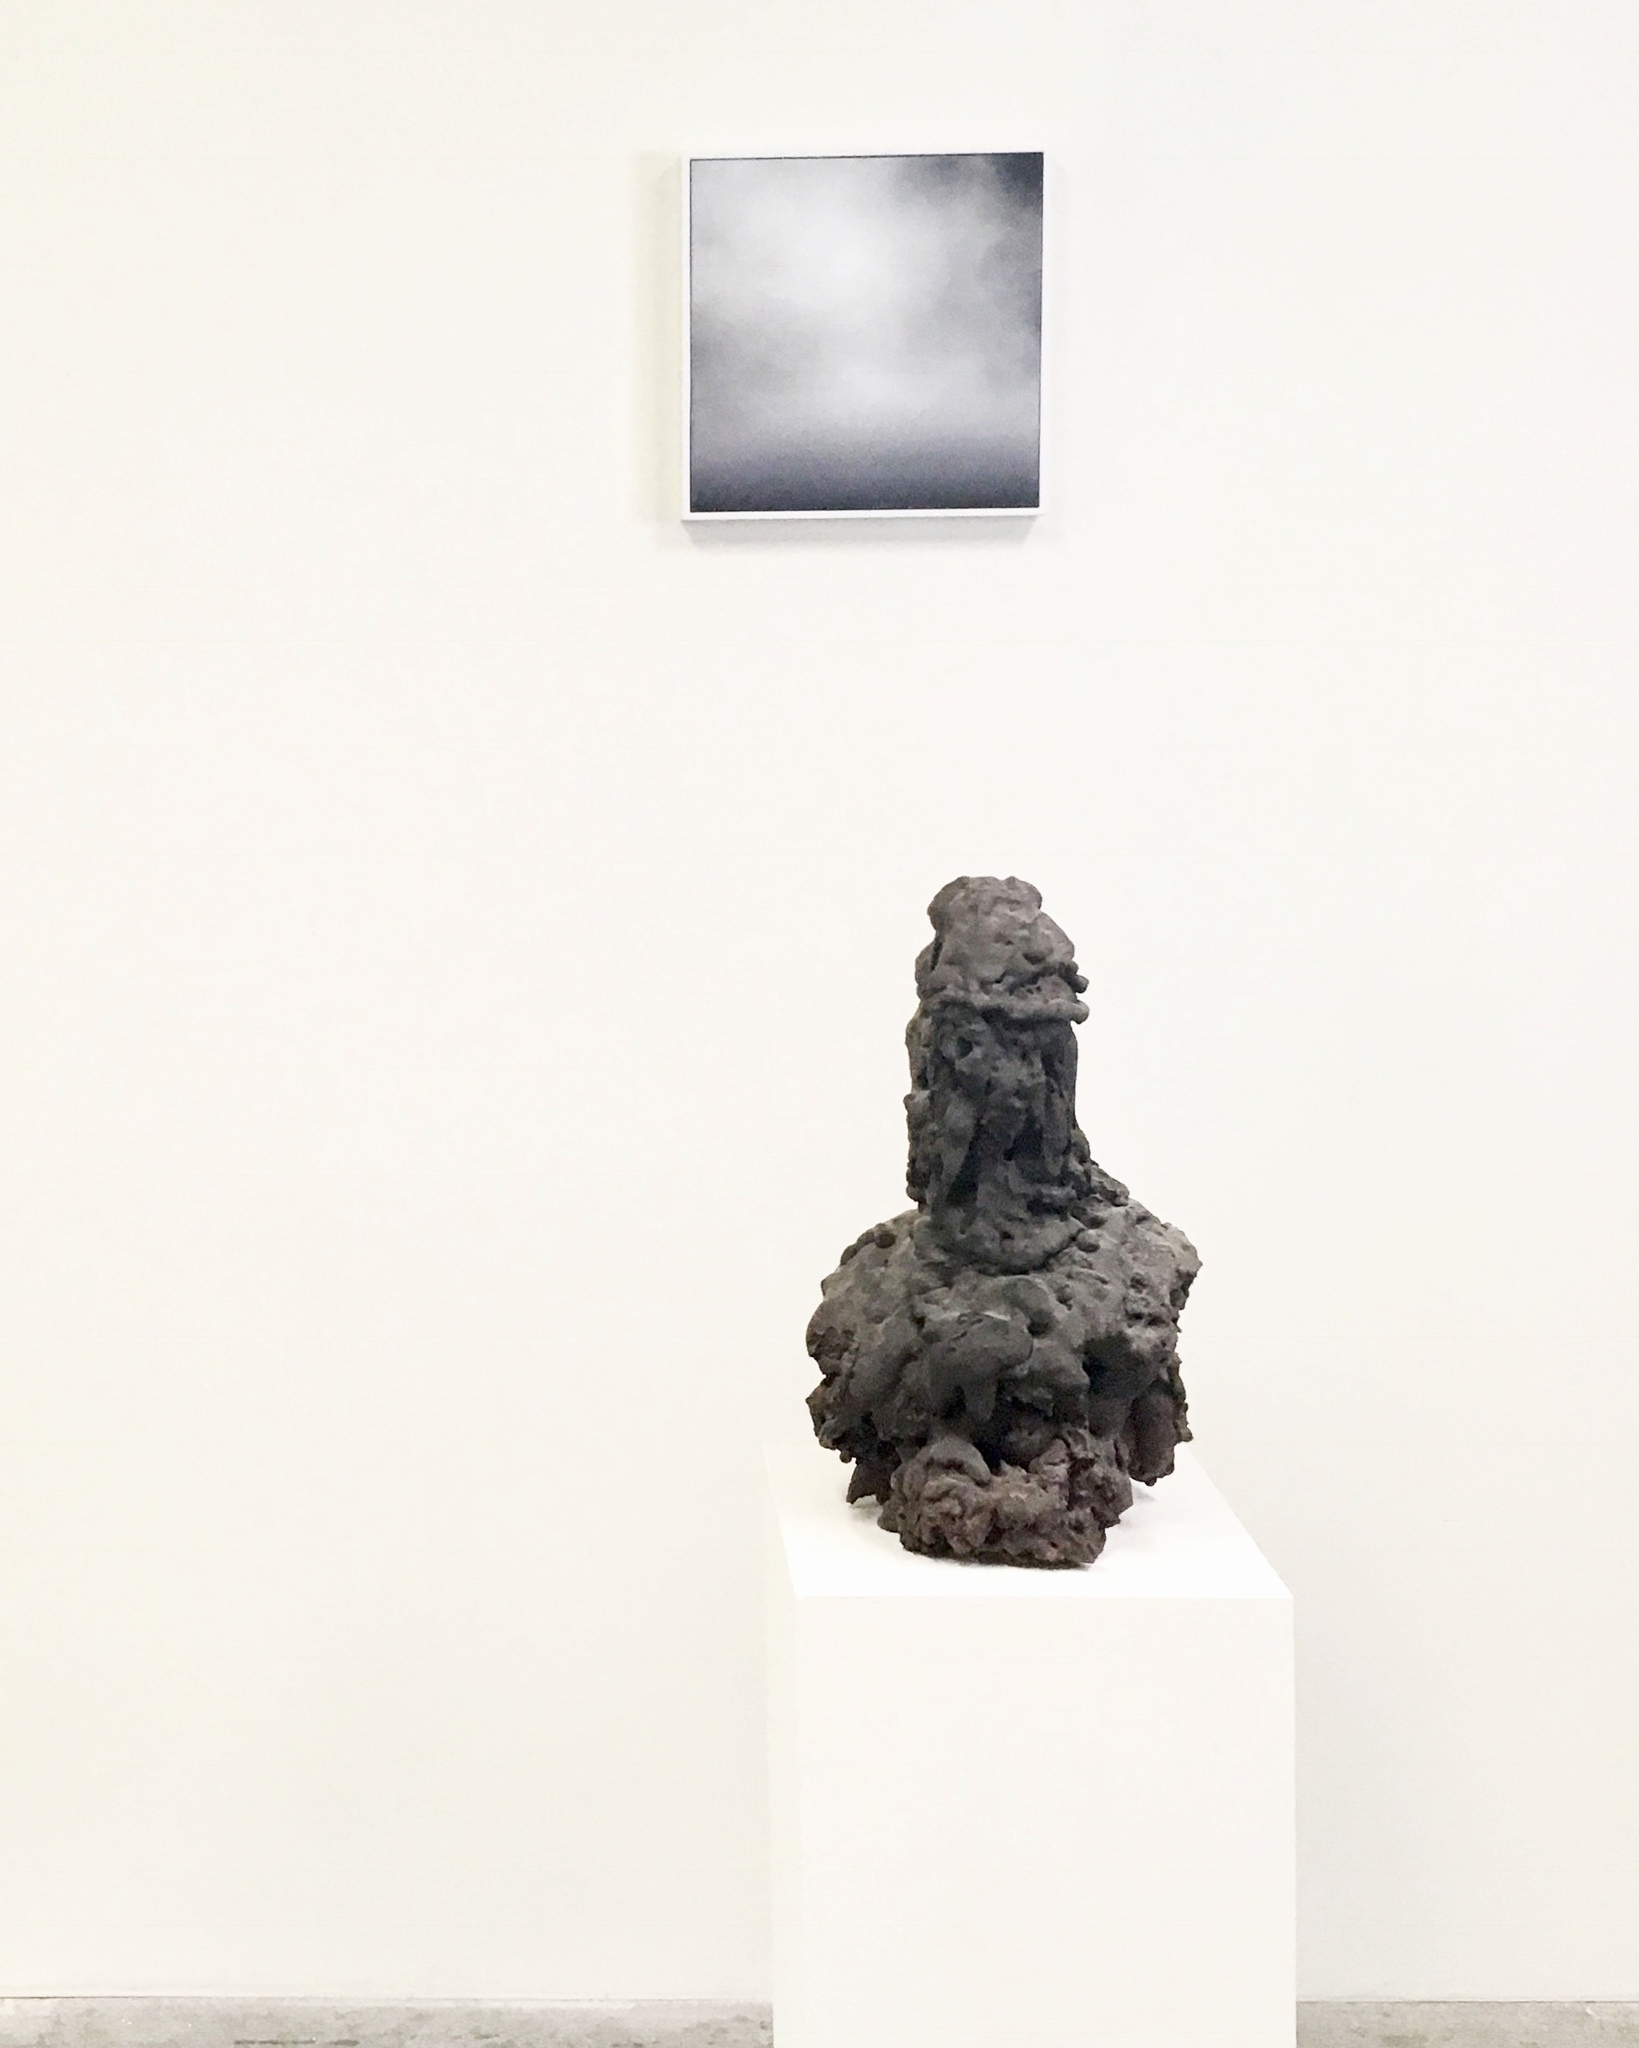 Installation View with Sculpture